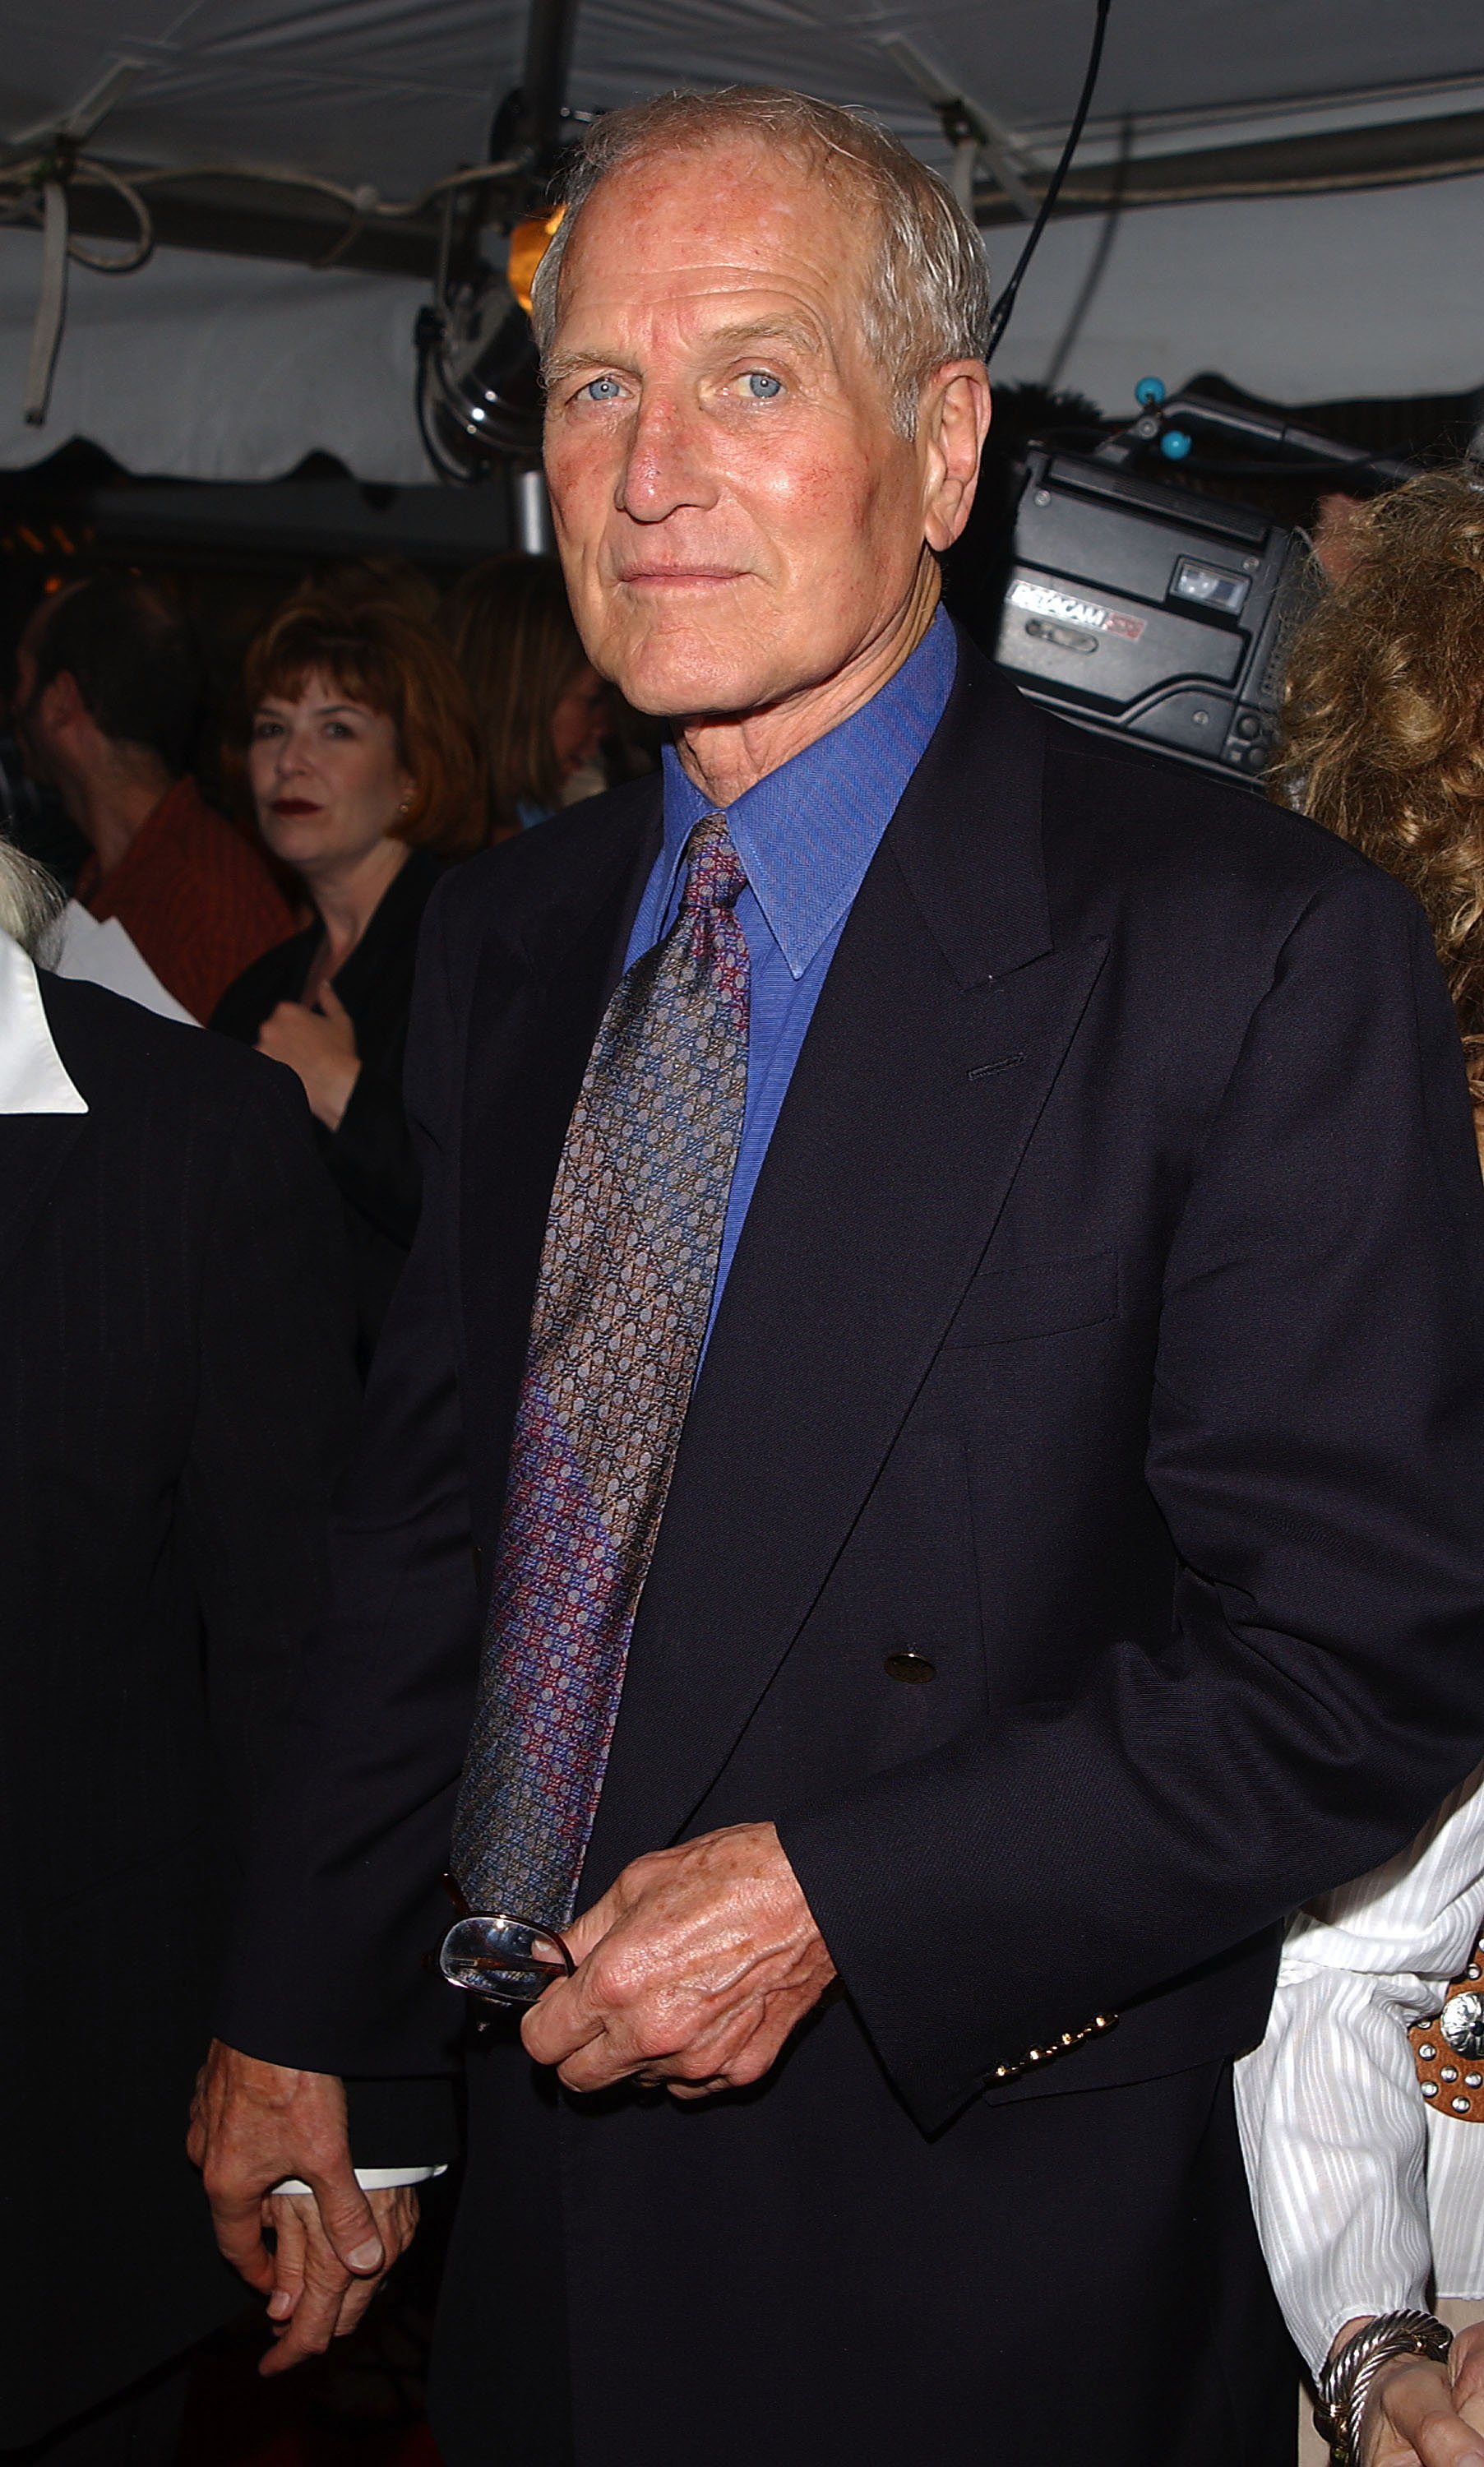 Paul Newman arrives for the "Road To Perdition" film premiere at the Ziegfeld Theater on July 9, 2002  in New York City | Photo: Getty Images